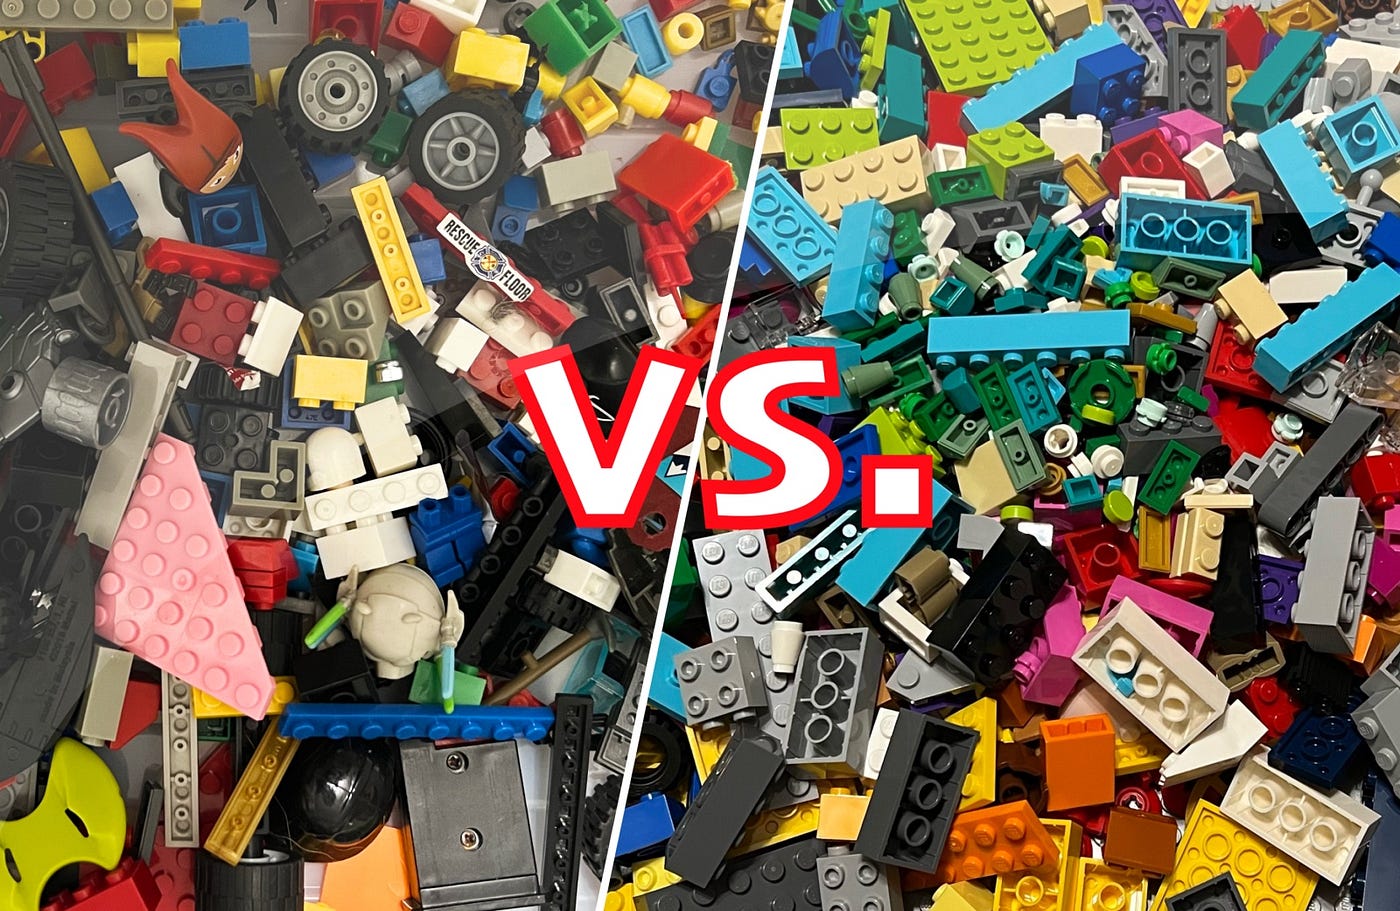 LEGO Categories for Sorting - Brick Land